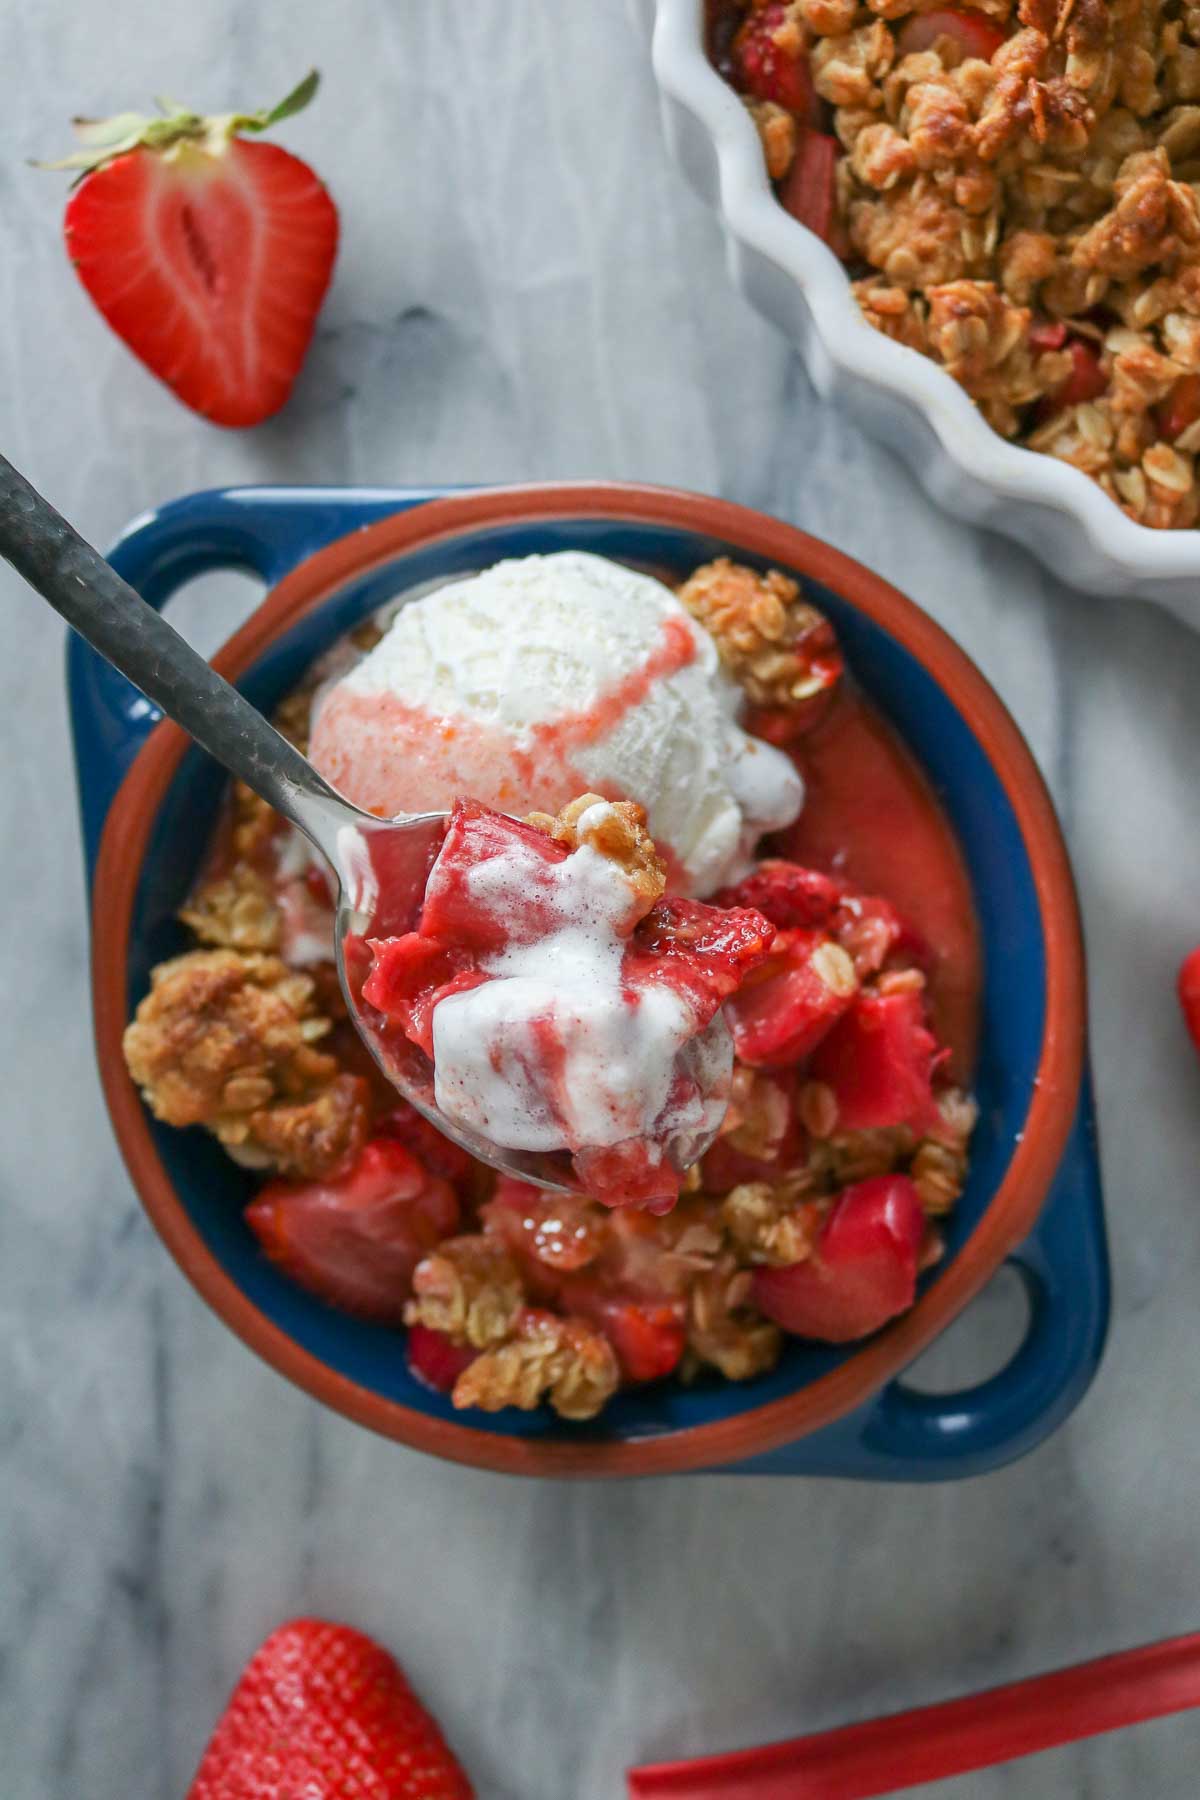 Spoonful of fruit crisp and ice cream from a dish.